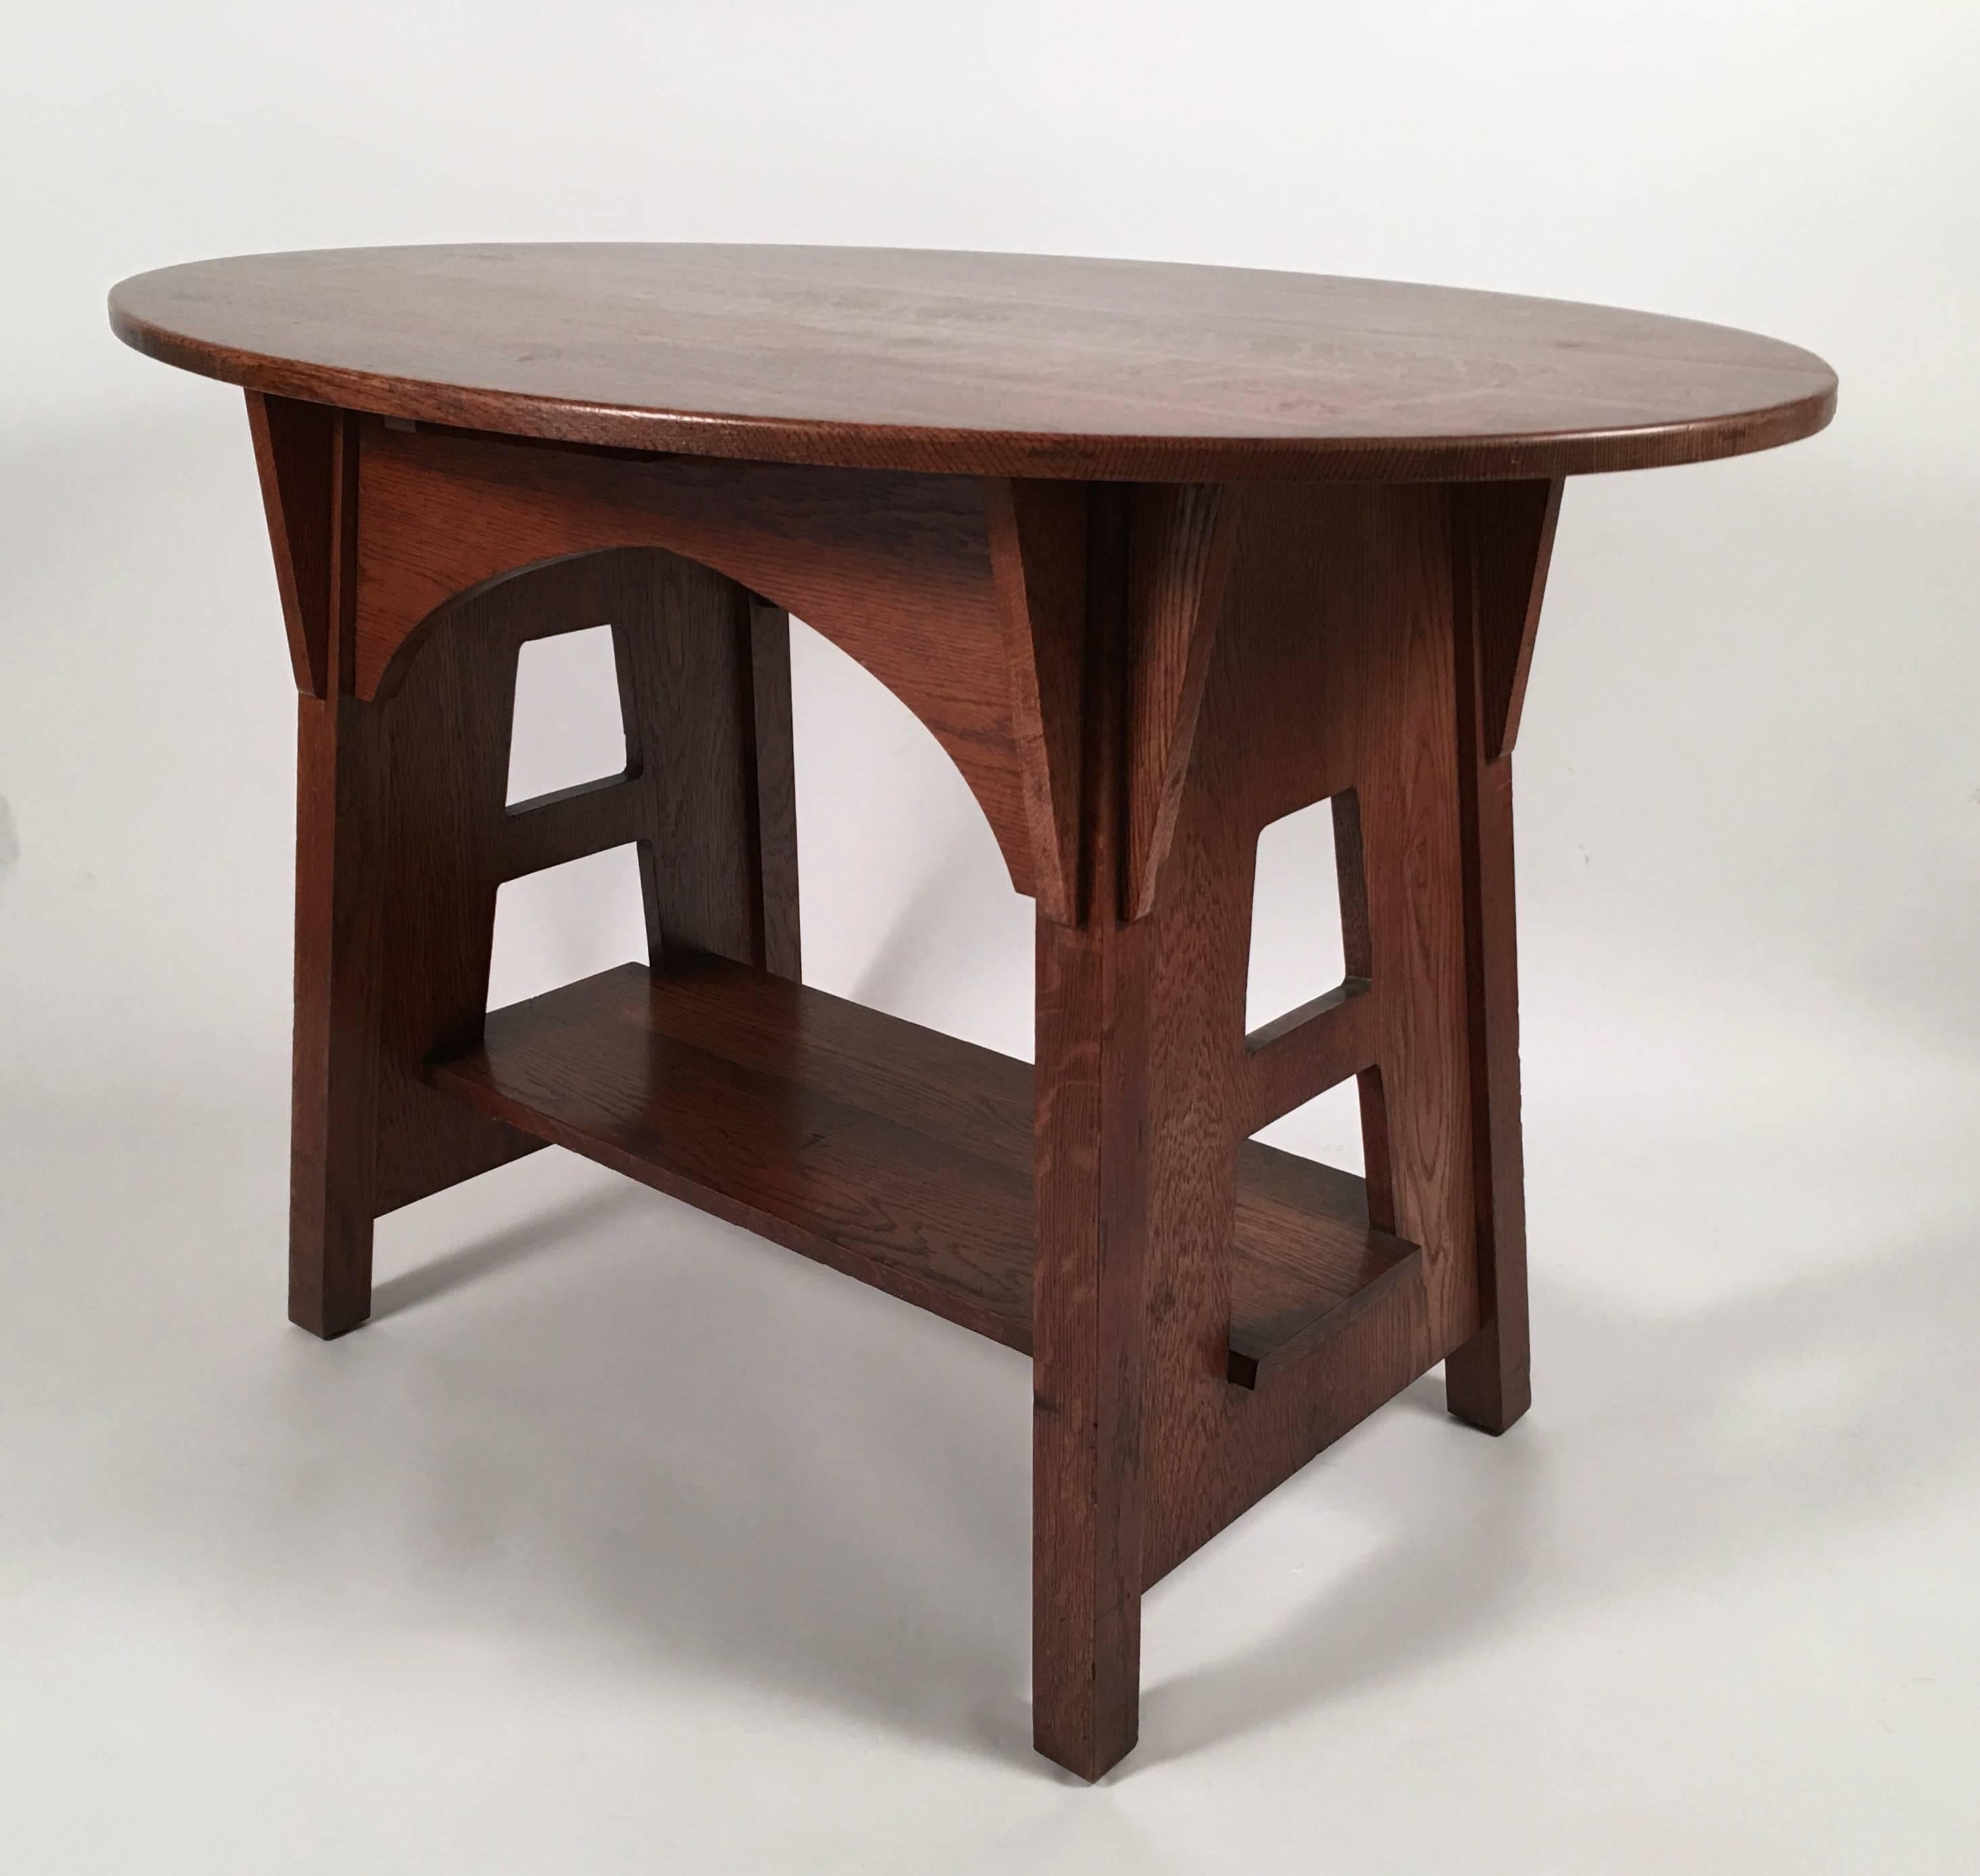 Arts and Crafts Arts & Crafts Period Turtle-Back Table by Charles Limbert, circa 1915